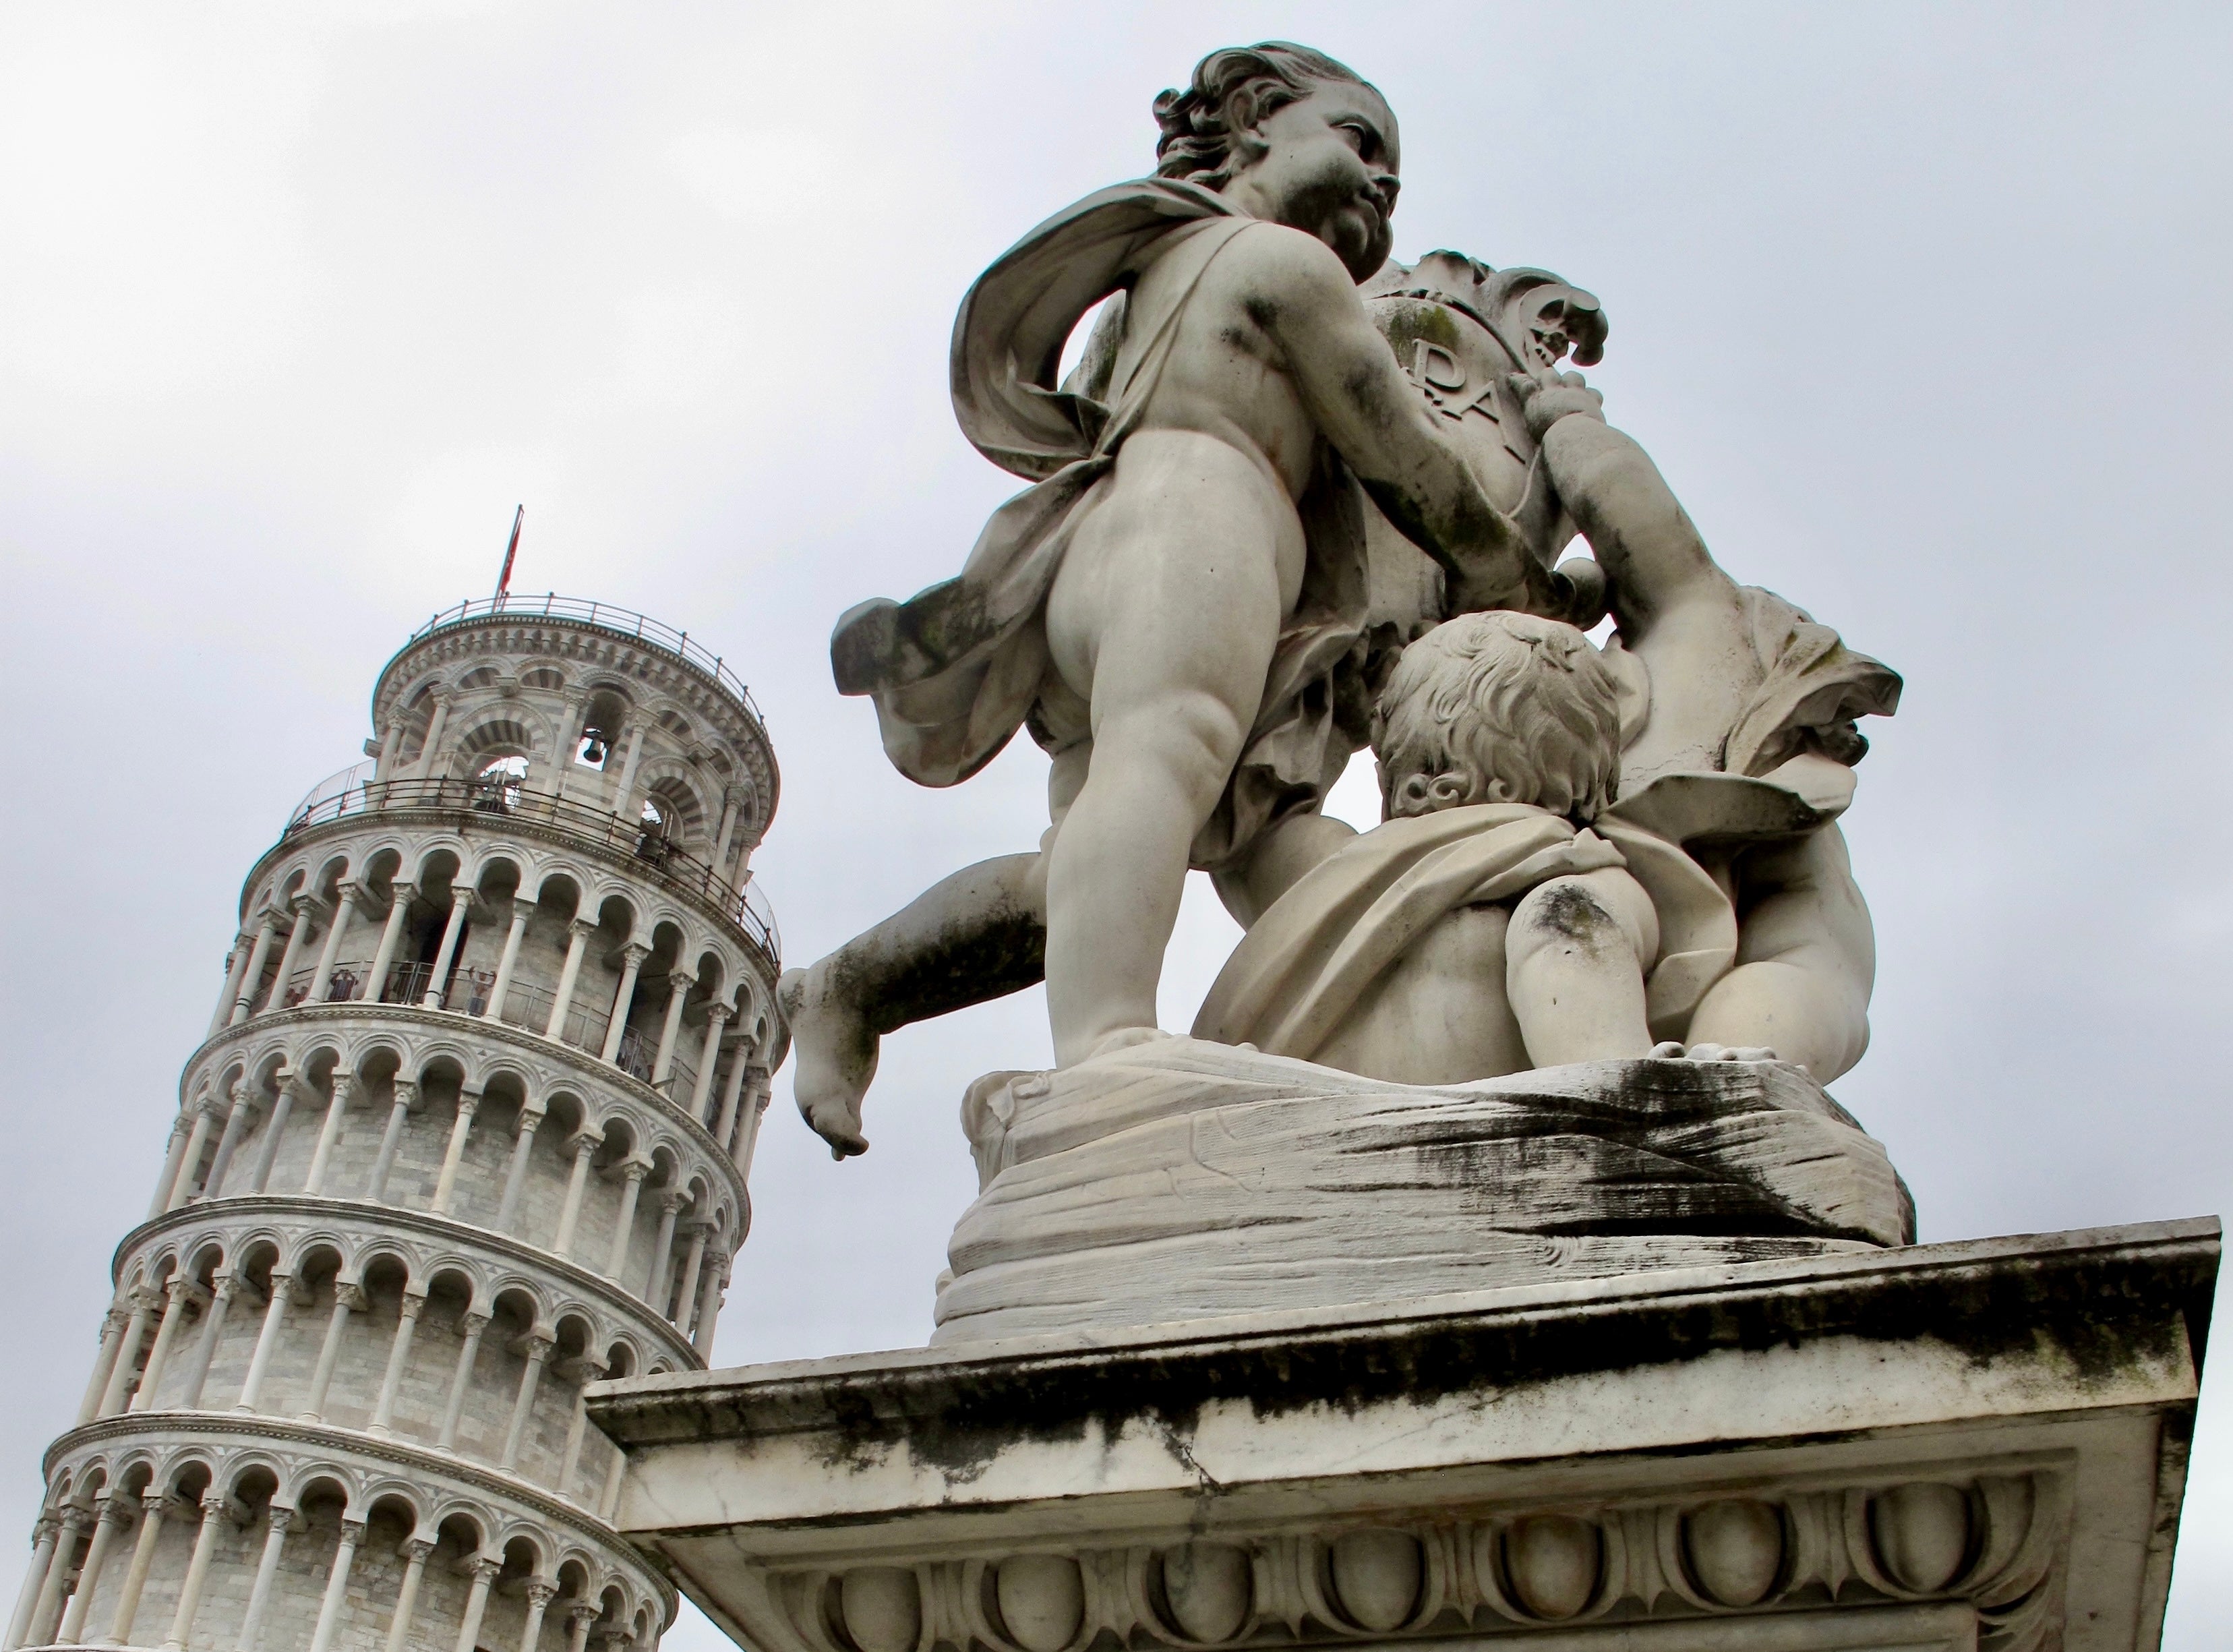 The airline has a good range of flights to Pisa – but it doesn’t have a UK monopoly